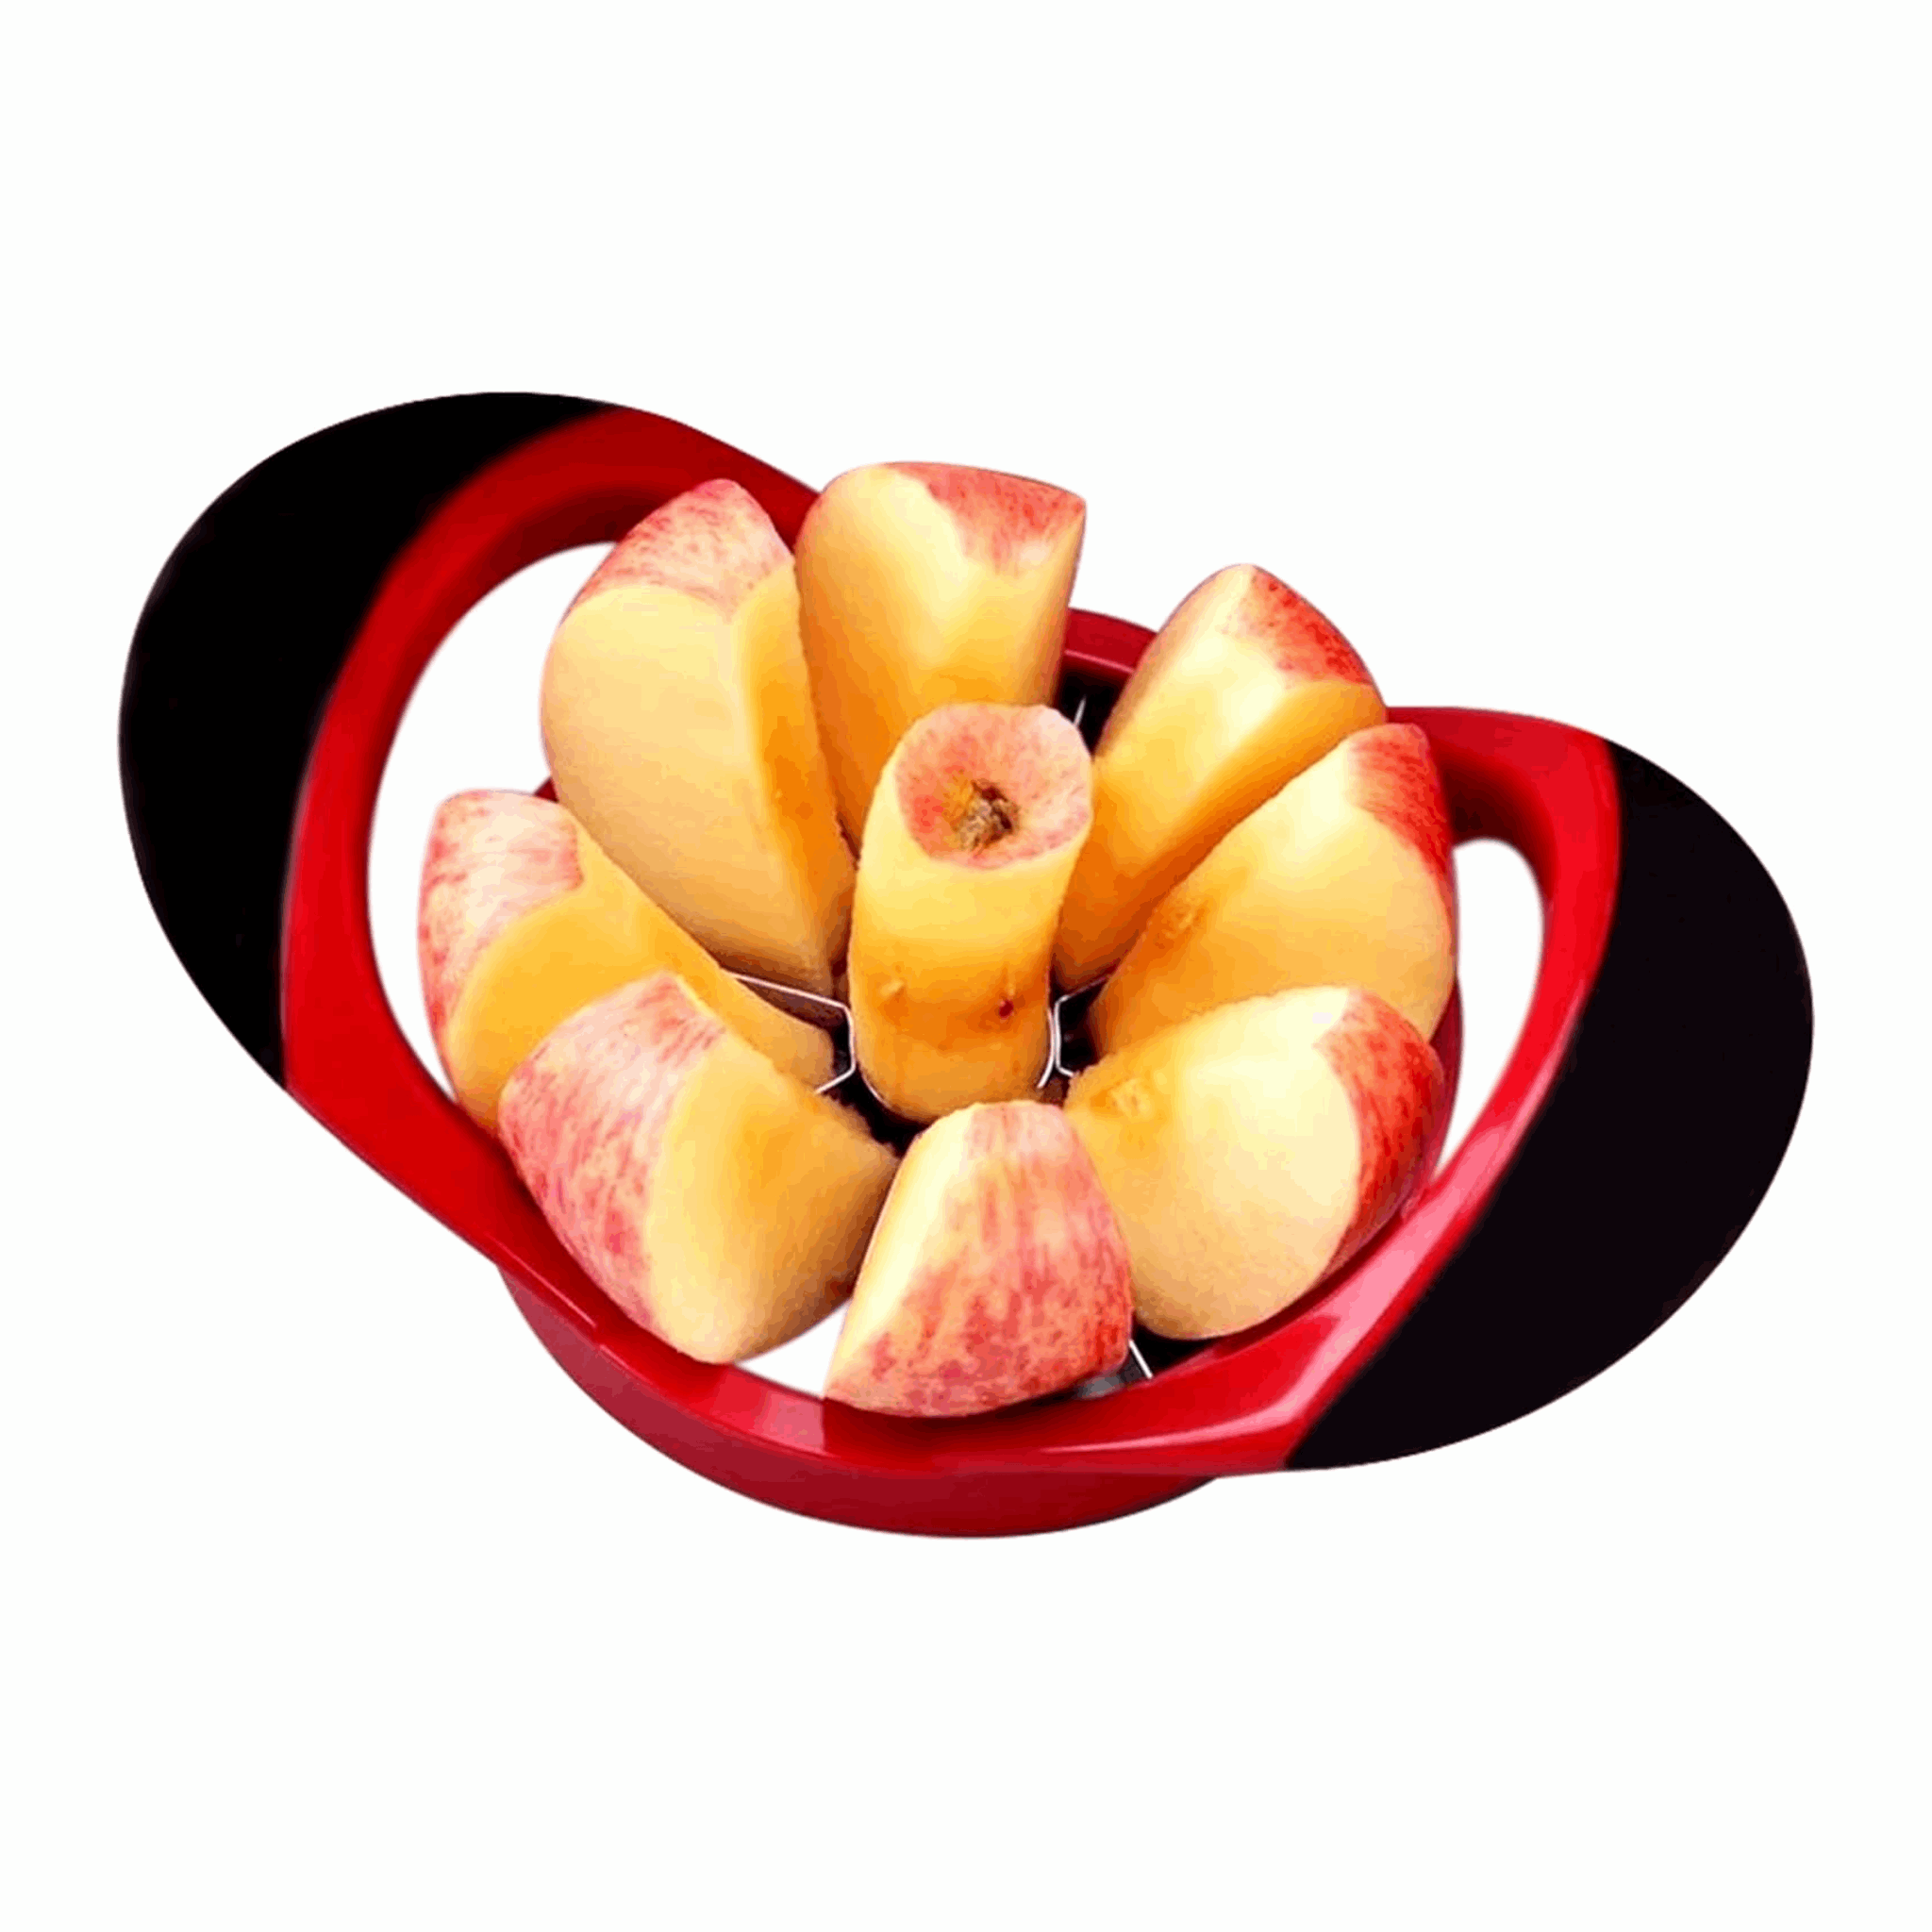 Apple Corer and Slicer - Stainless Steel Apple Cutter - Rubber Grip Handle Divider with 8 Sharp Blades